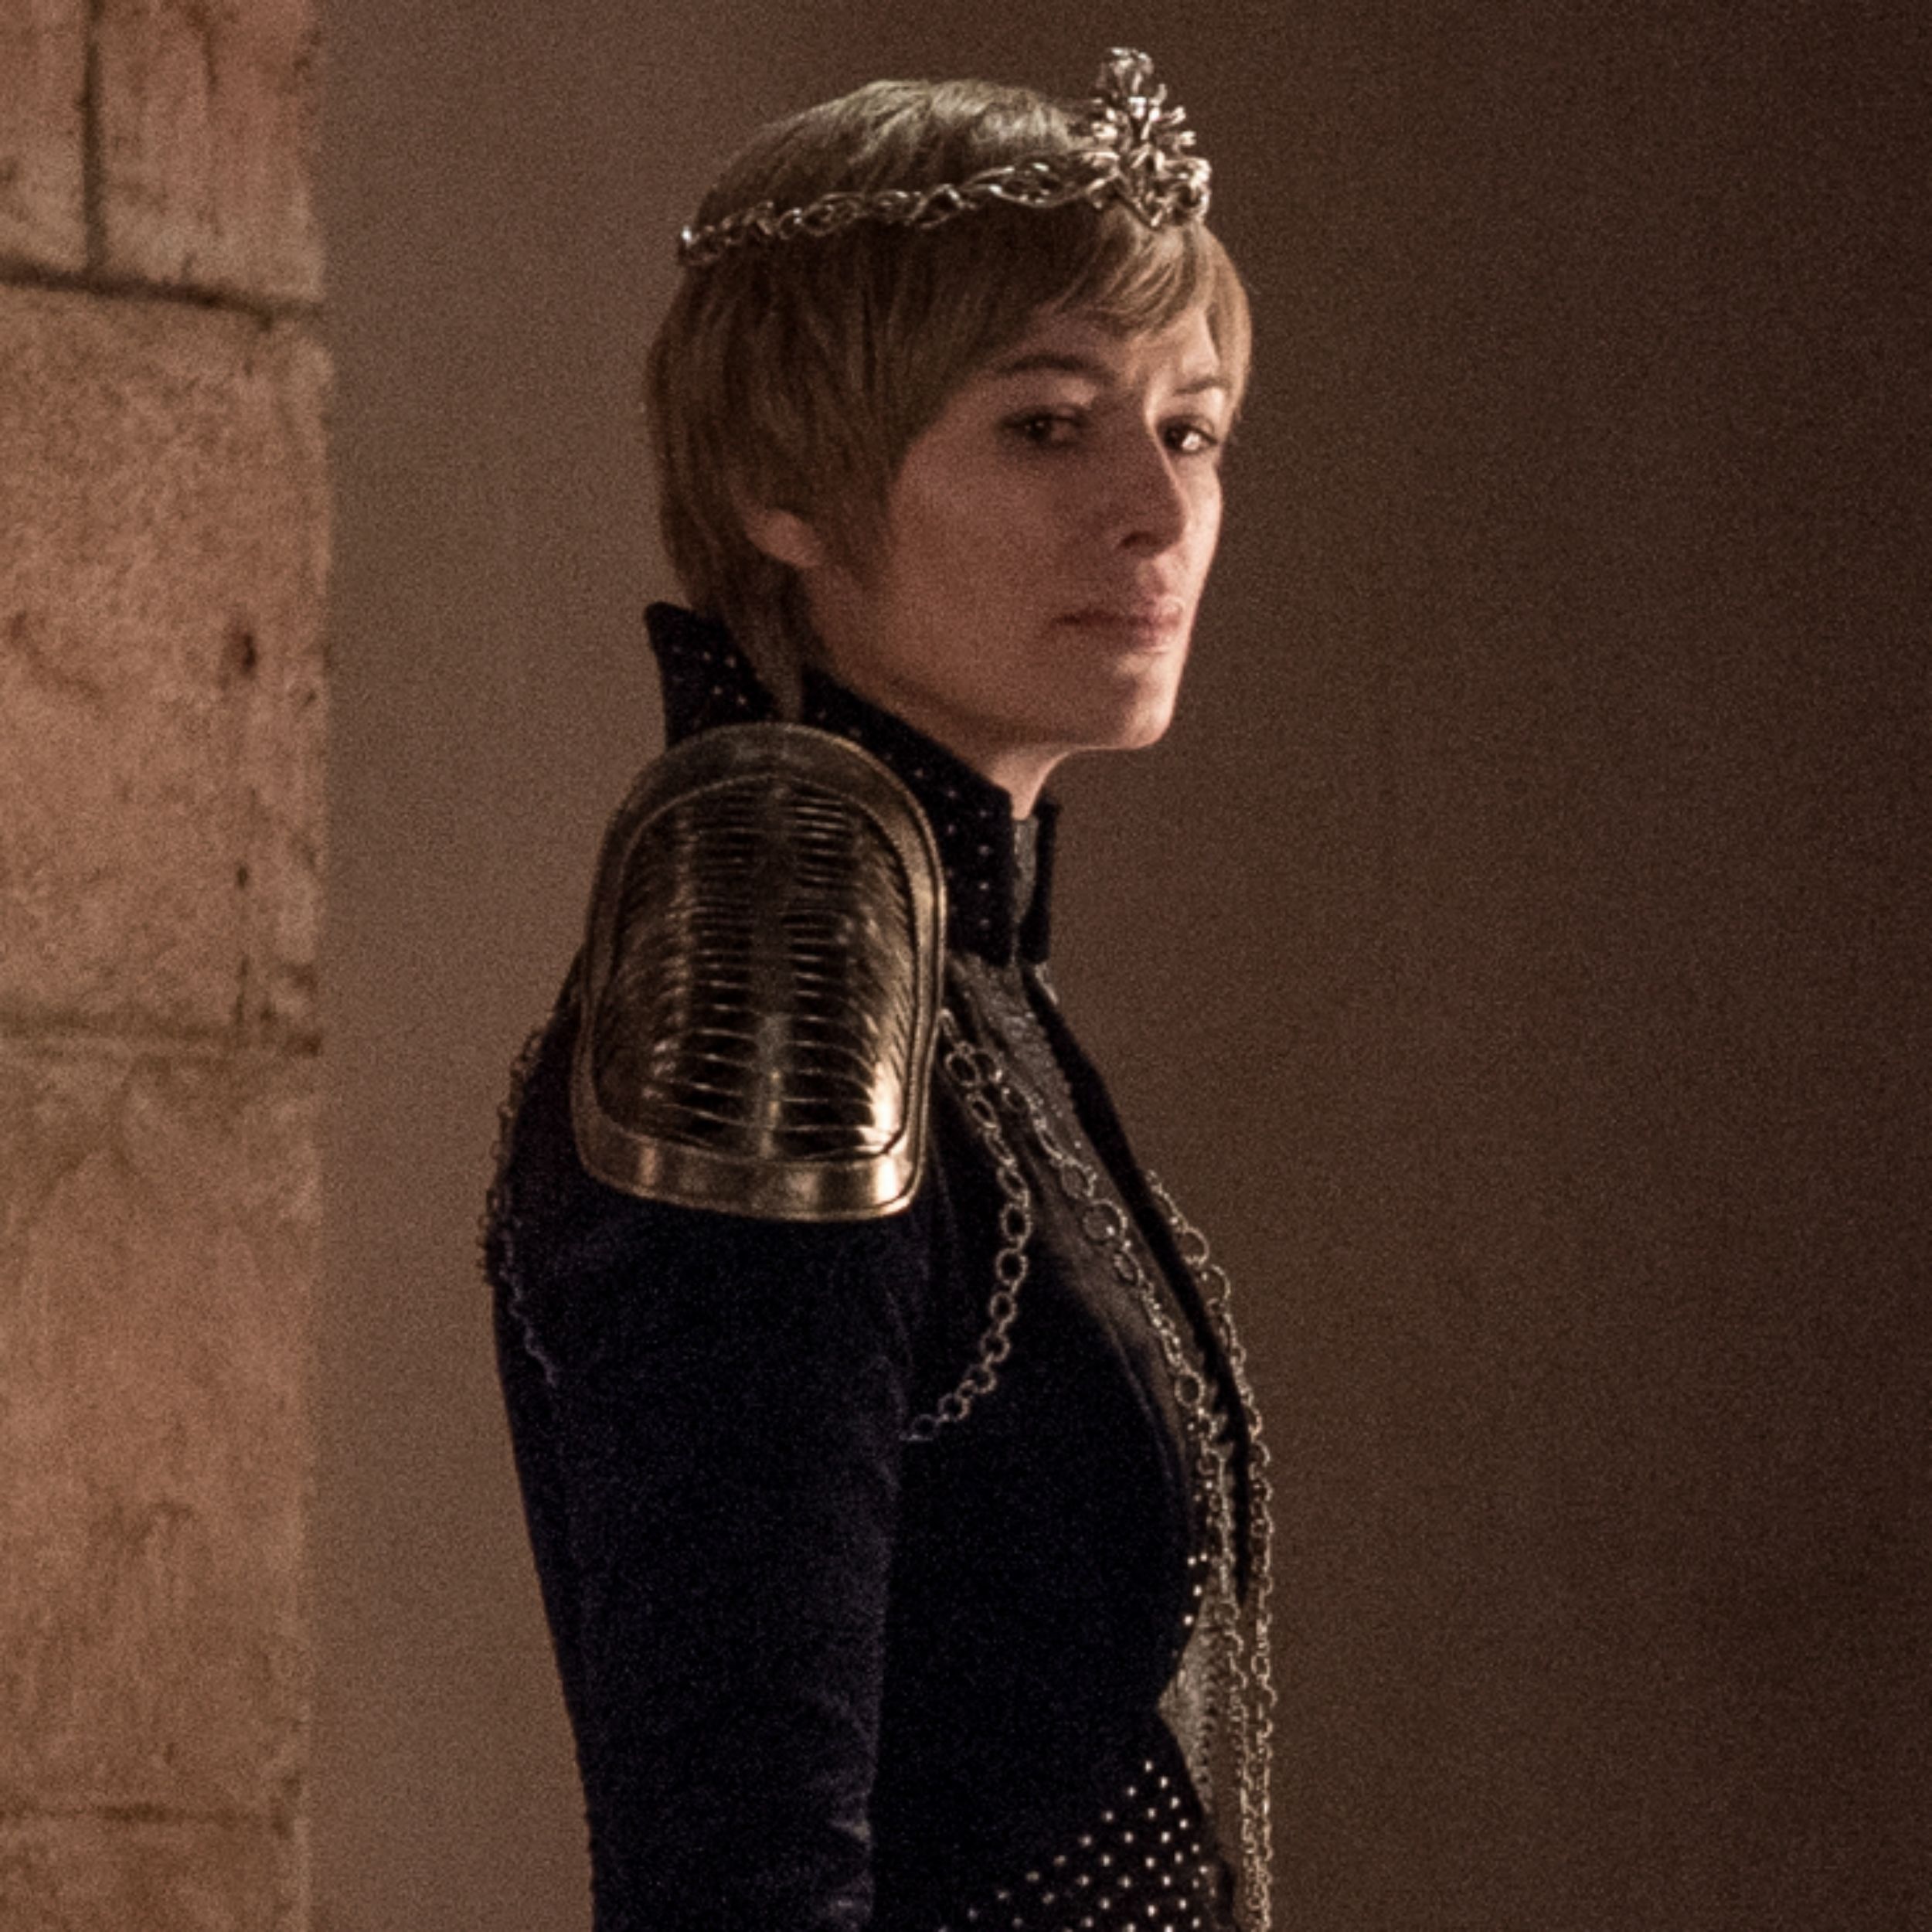 Is Game Of Thrones Cersei Going To Use Wildfire Again In Season 8 Episode 5...